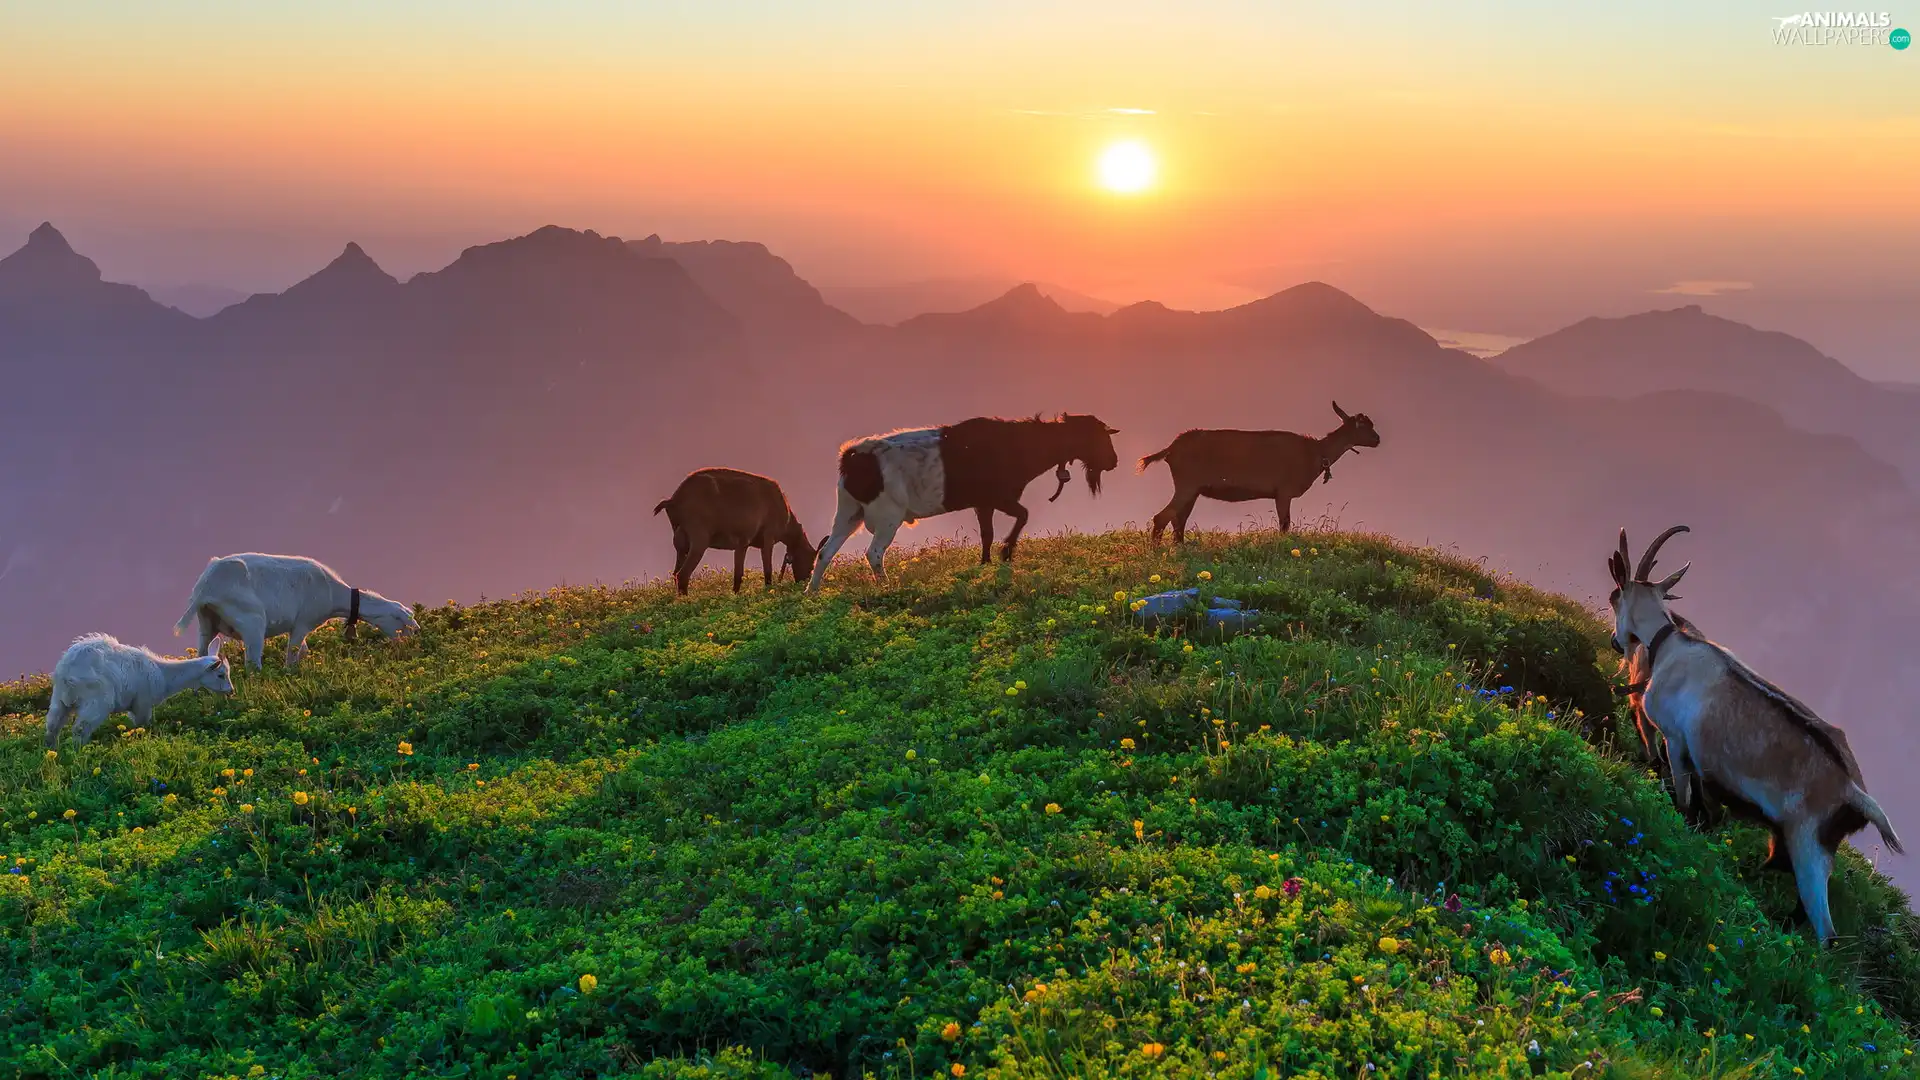 Goats, Mountains, Great Sunsets, Hill